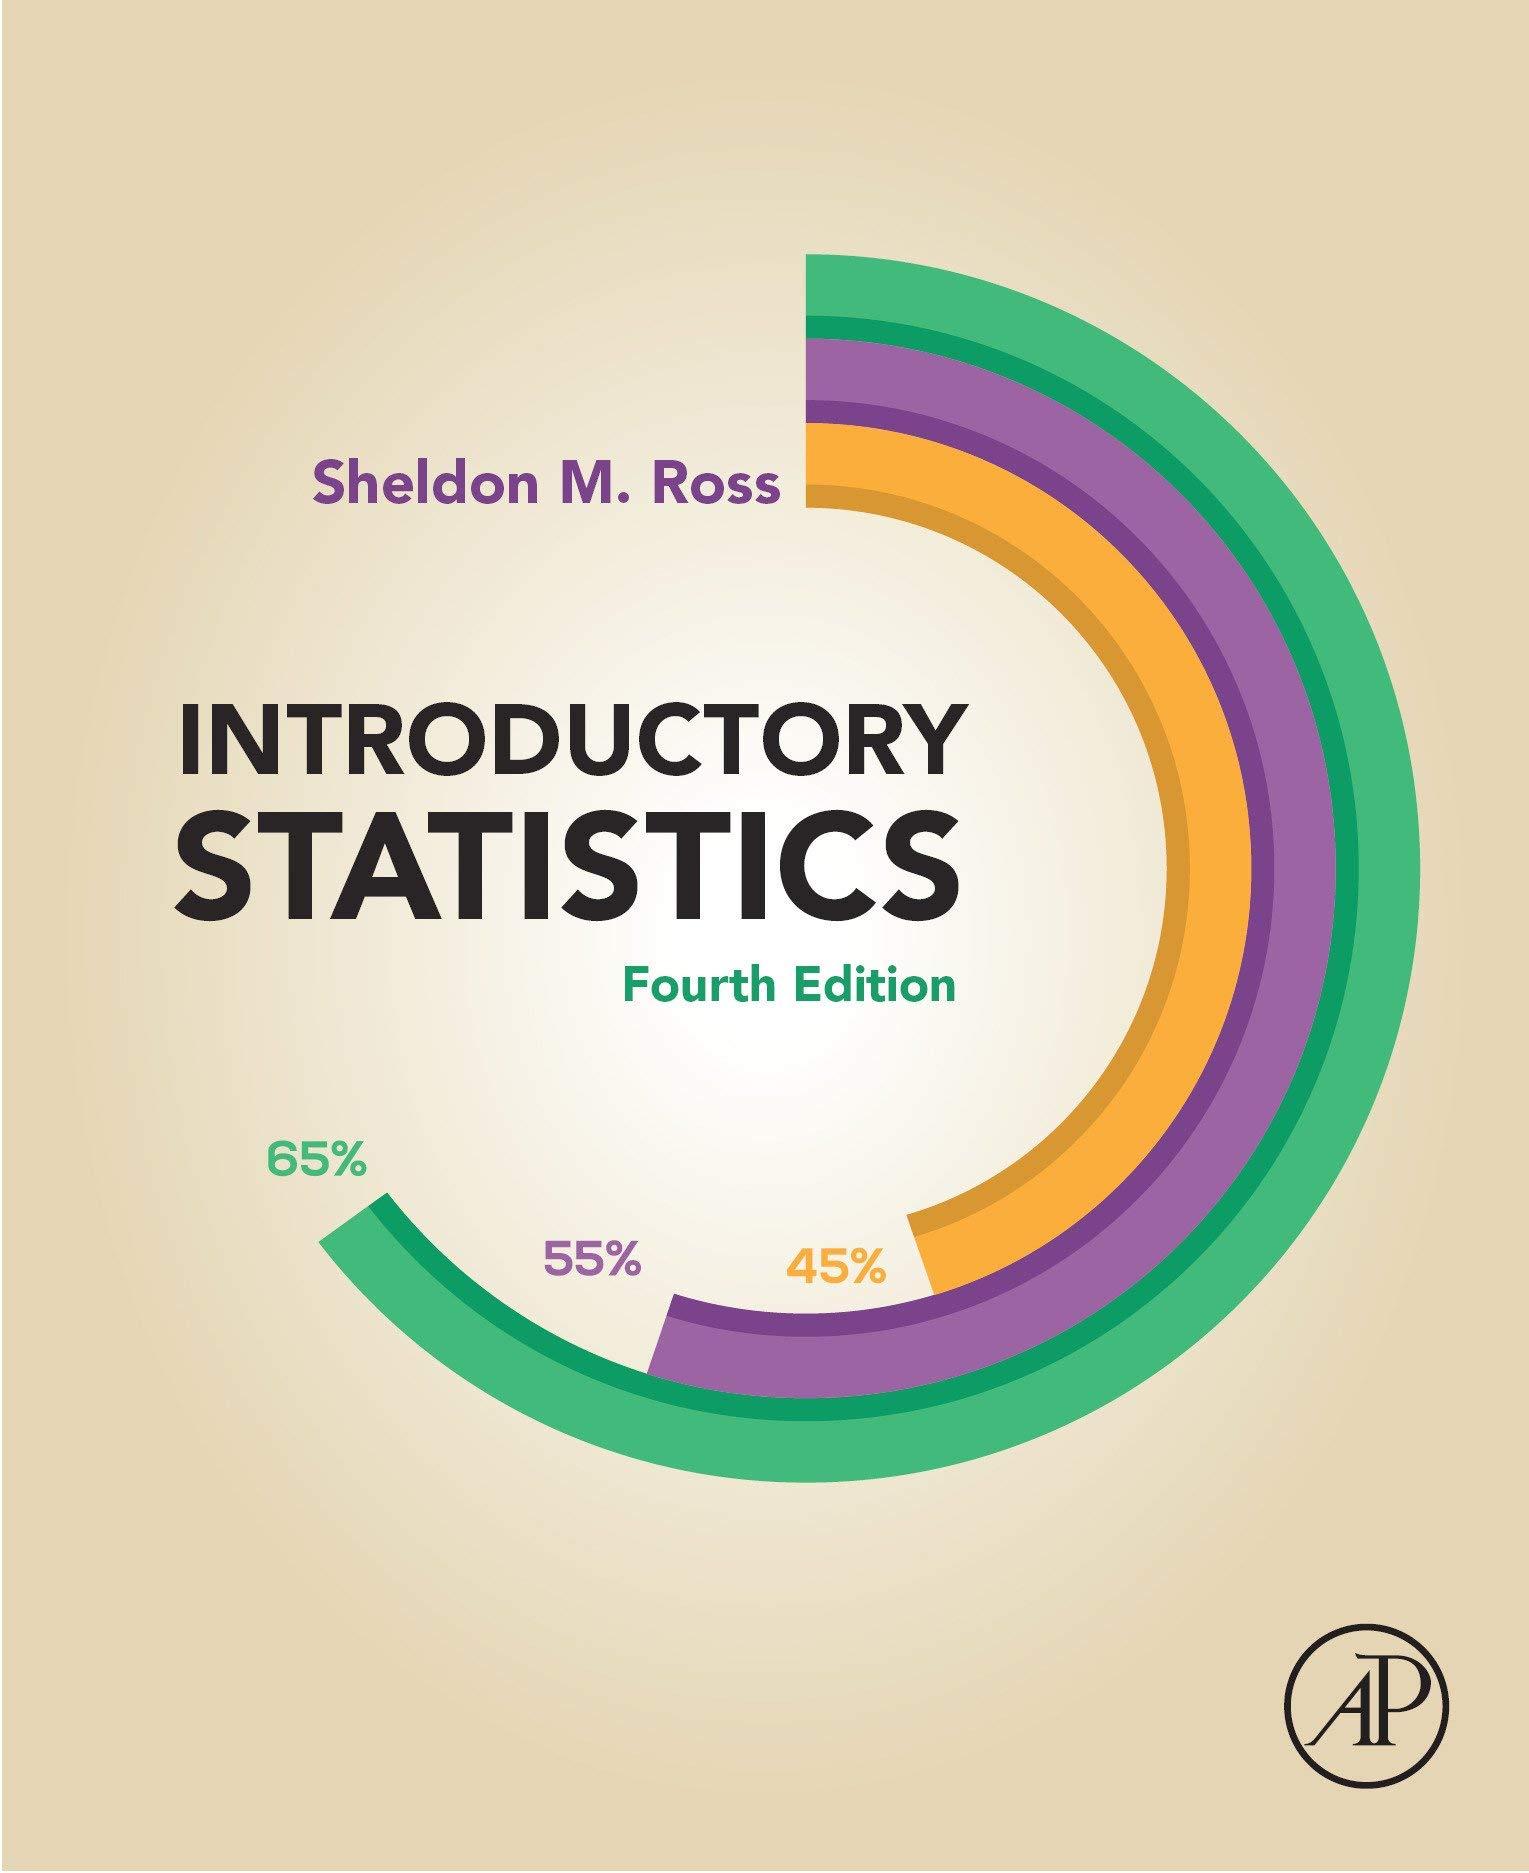 introductory statistics 4th edition sheldon m. ross 0128043172, 978-0128043172